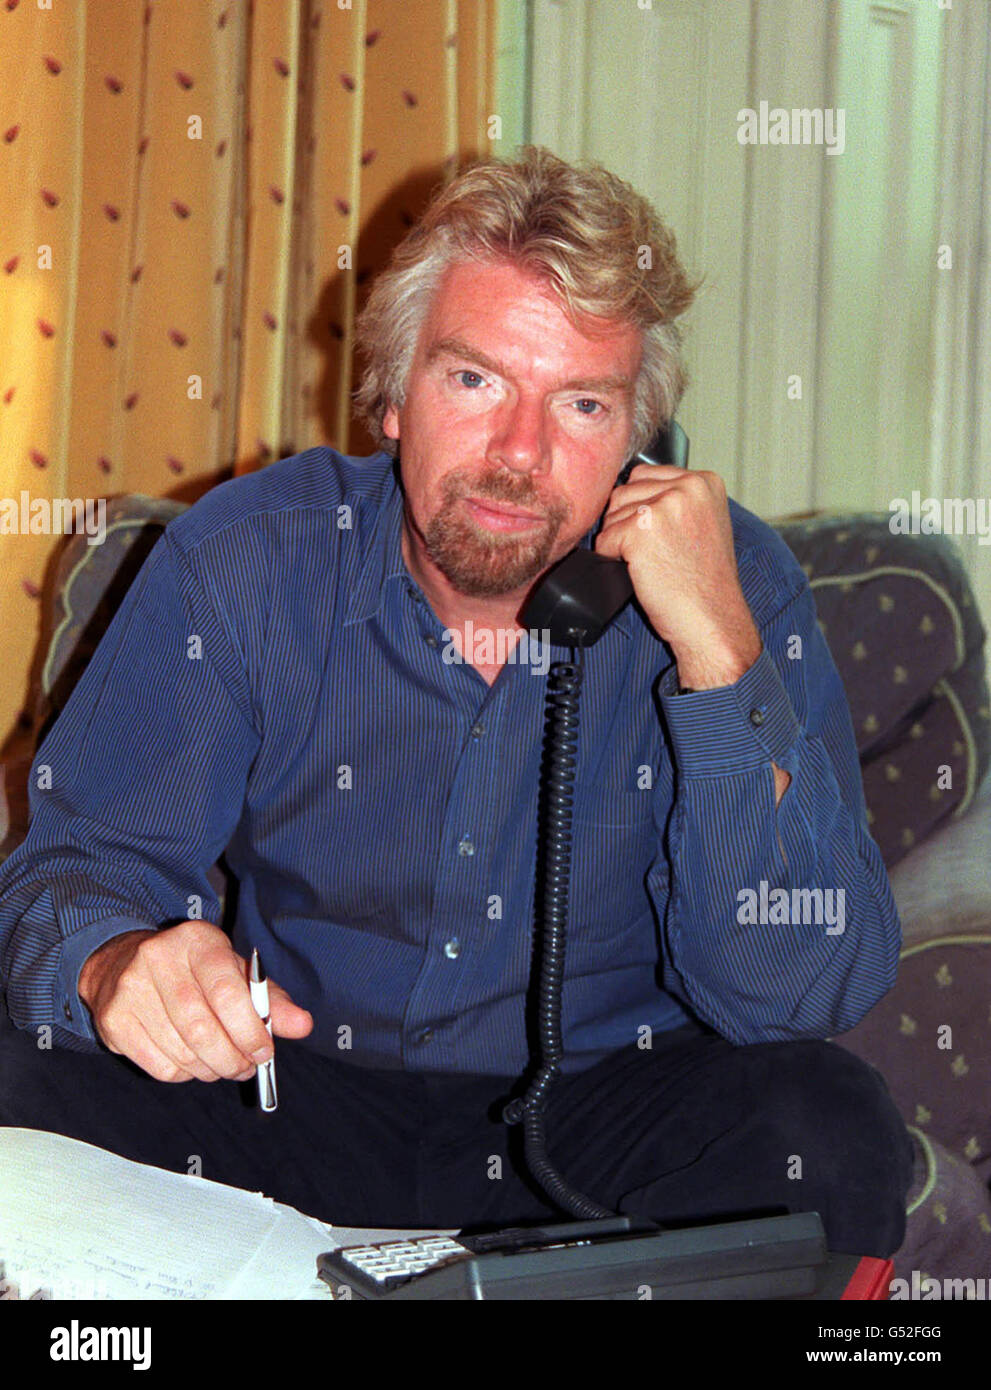 Sir Richard Branson speaks to inventor Trevor Baylis, 62, using the world's first shoes made for talking. The shoes were hailed a success when Mr. Baylis called Sir Richard Branson at his home from the Namibian Desert. *... Mr Baylis, who is on day seven of a 100-mile trek across the desert organised by the charity Mines Advisory Group, was able to generate power for the link-up from the simple motion of walking using his prototype shoes fitted with tiny dynamos. Stock Photo